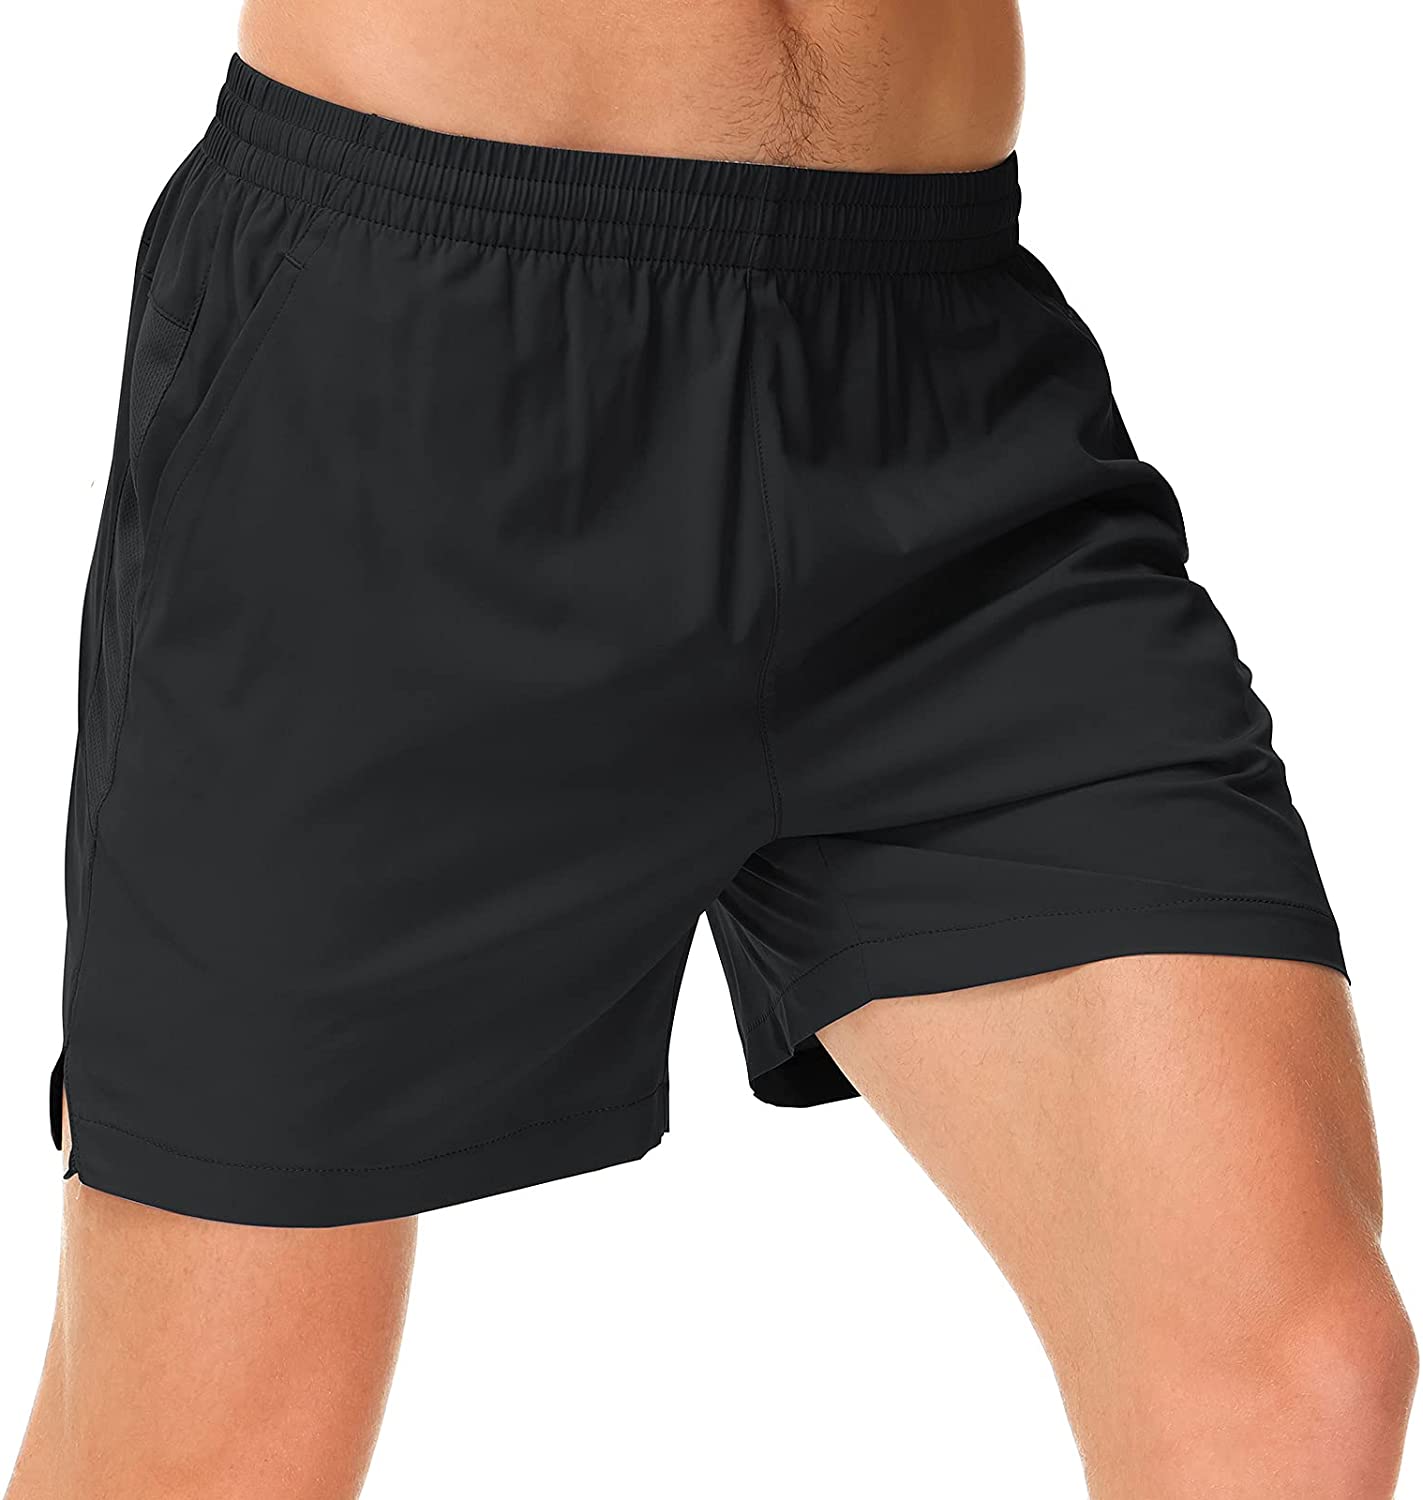 Lightweight and Breathable Black MIER Mens Workout Running Shorts Quick Dry Active 5 Inches Shorts with Pockets